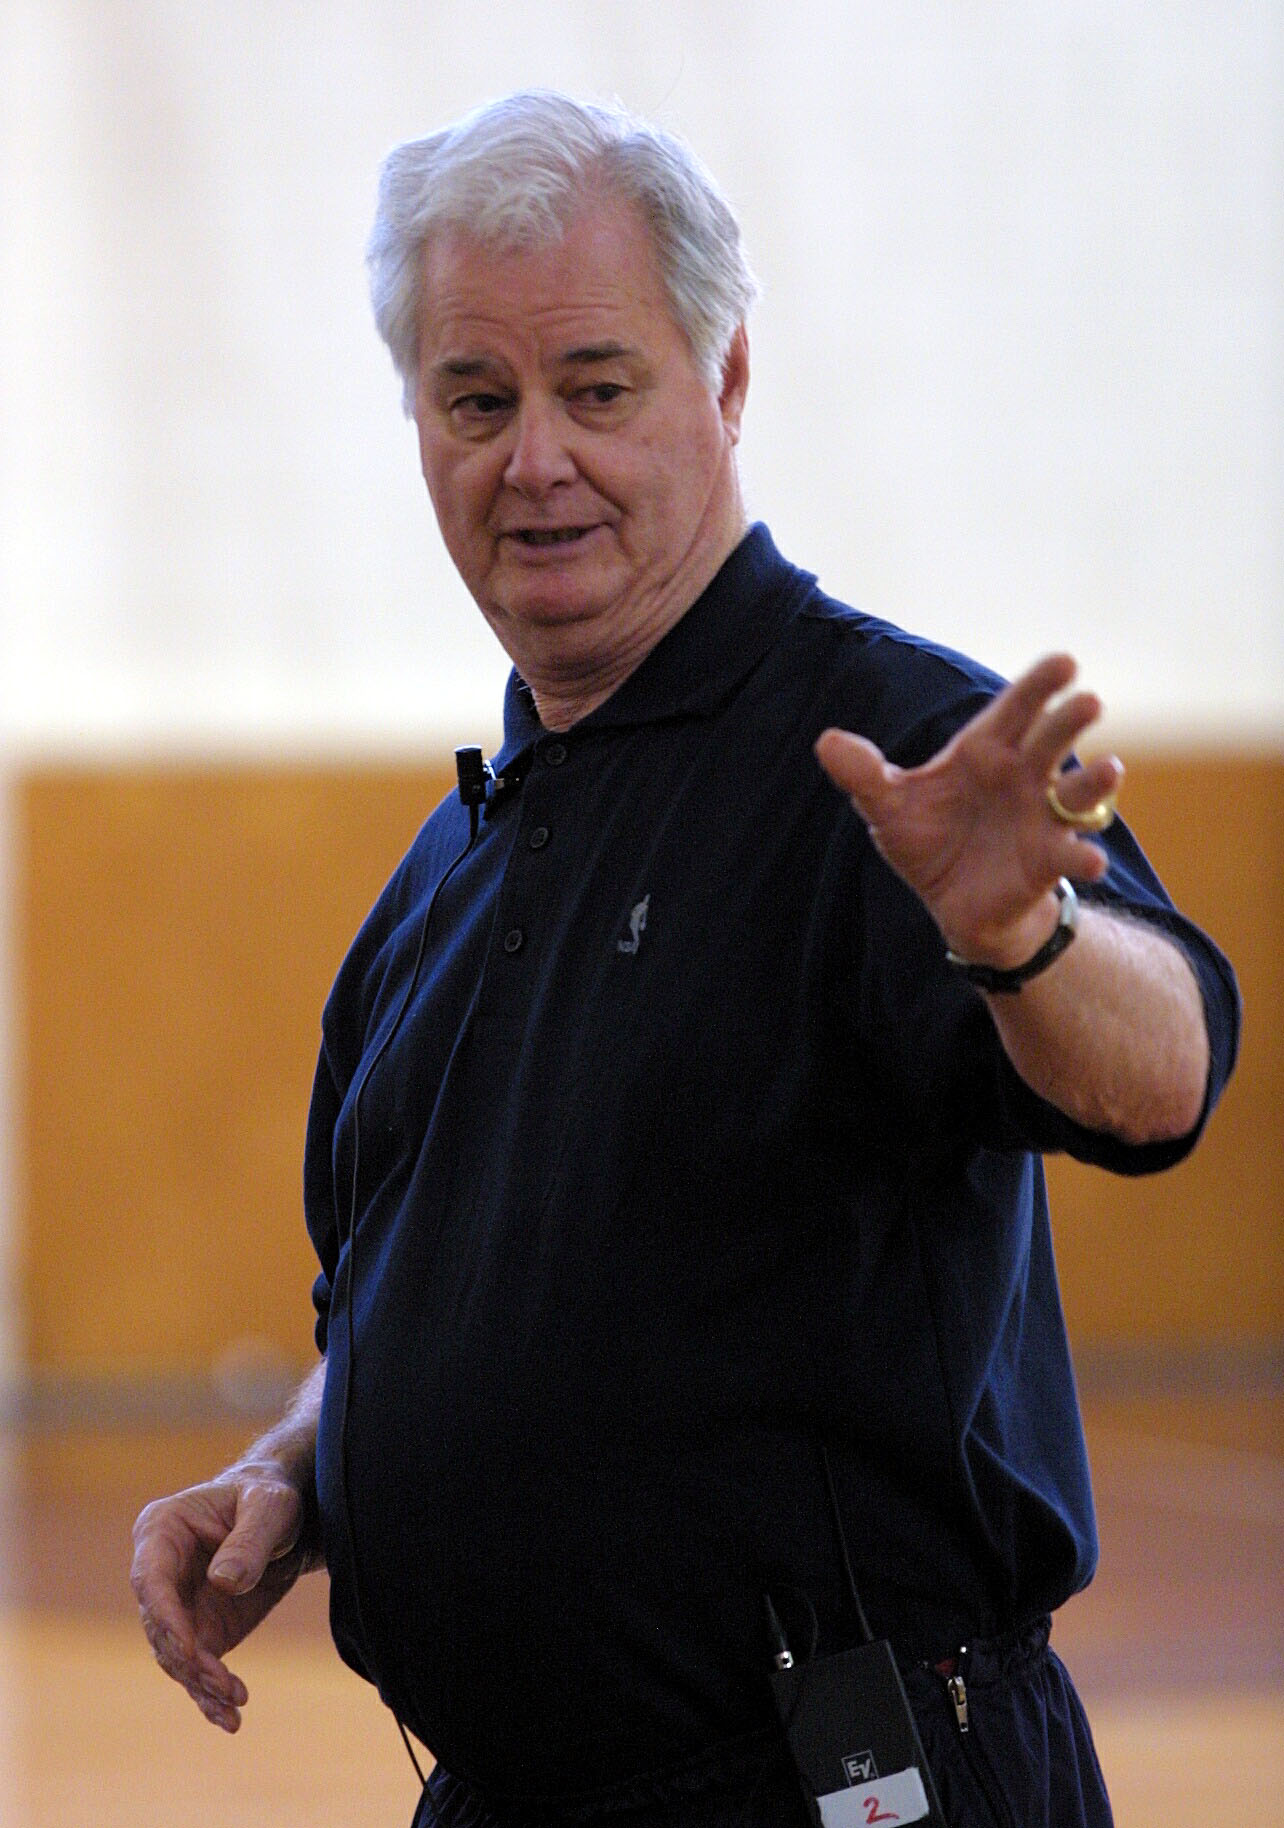 AUCKLAND, NEW ZEALAND - AUGUST 01:  Tex Winter ex NBA coach at a basketball training camp for New Zealand players at Youth town, Wednesday.  (Photo by Michael Bradley/Getty Images)